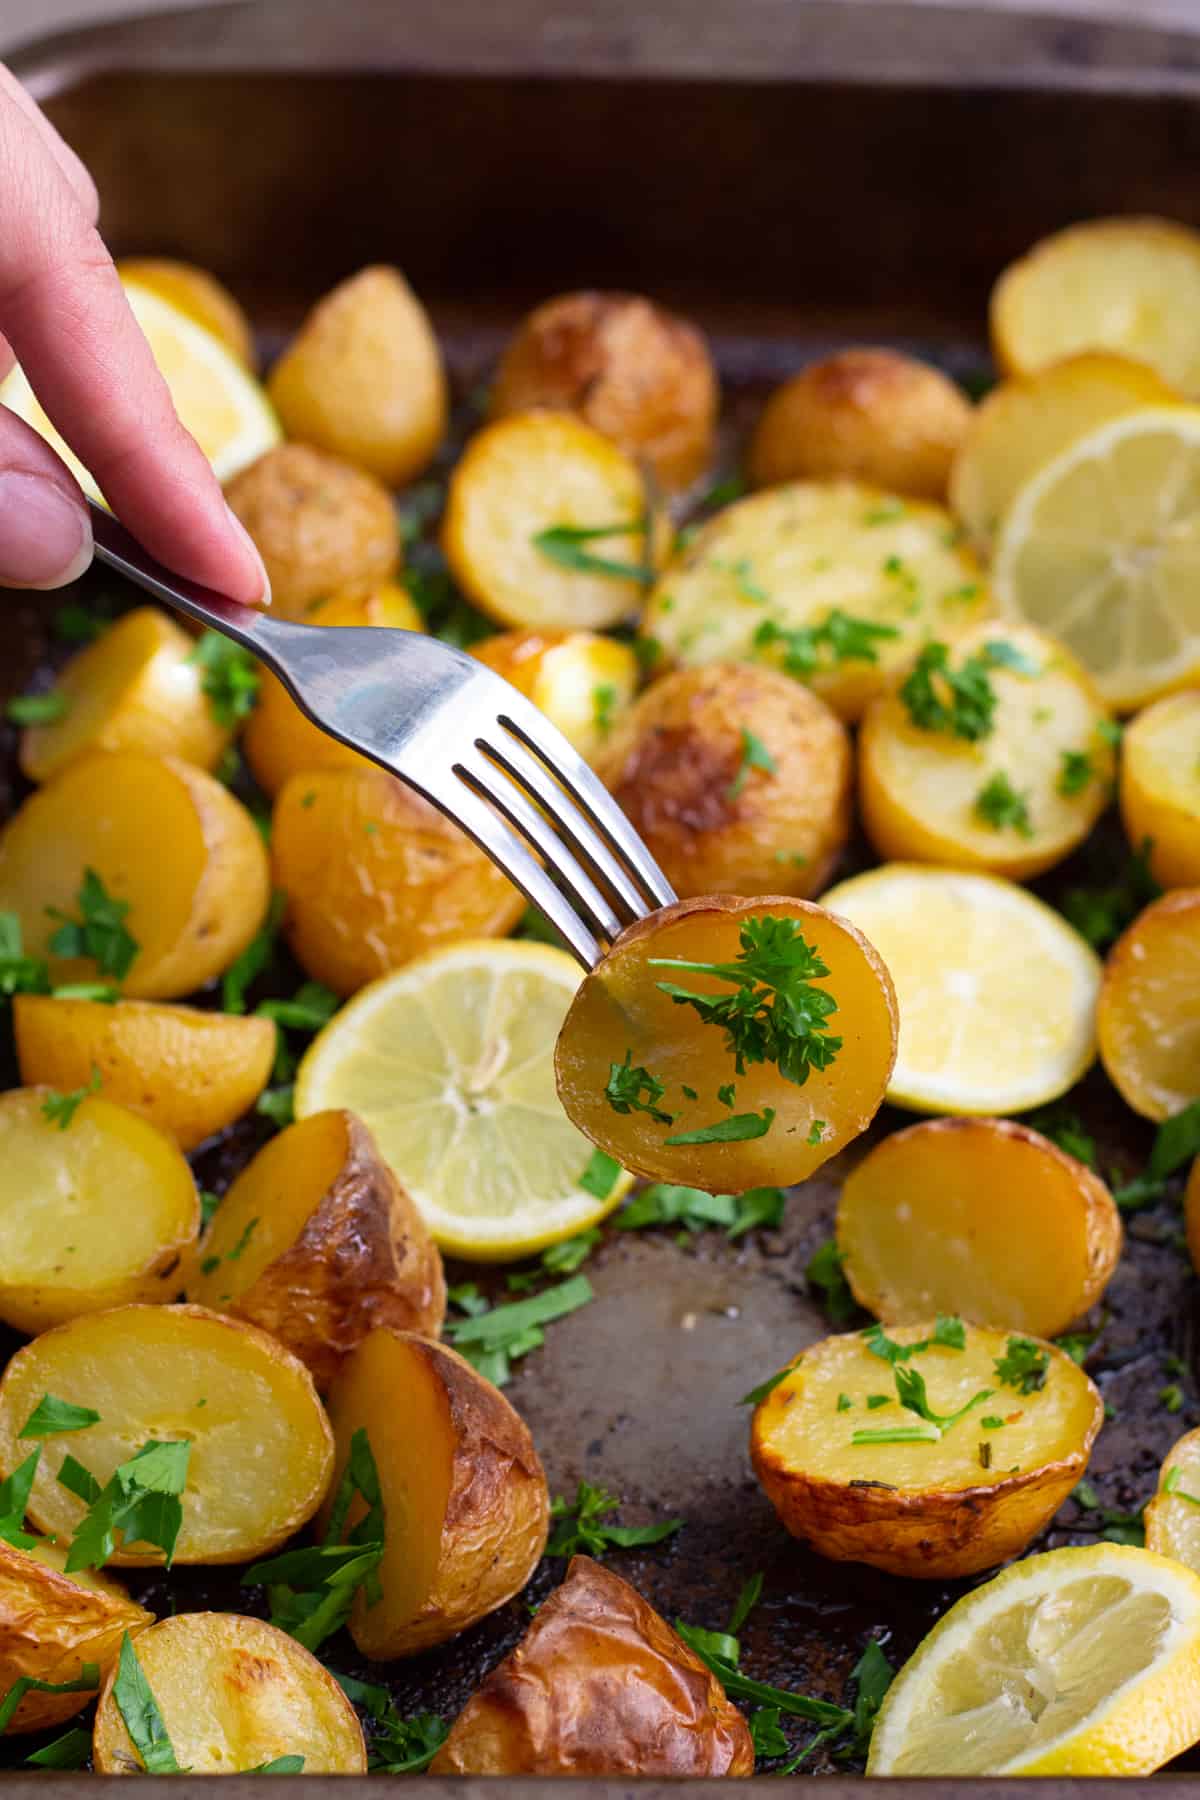 These Greek potatoes are probably going to be the best roasted potatoes you've ever had. Give roasted potatoes a Mediterranean twist by making them Greek style with garlic, herbs and lots of lemon!
